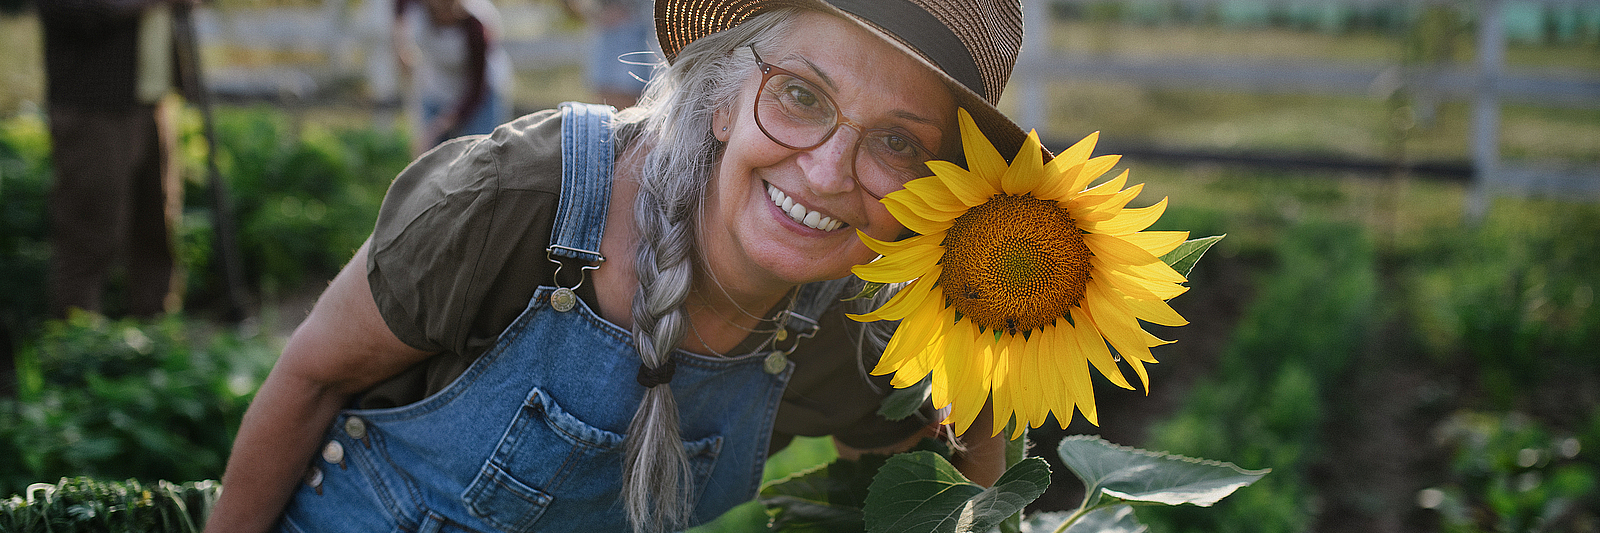 Senior female farmer with sunflower looking at camera outdoors at community farm.